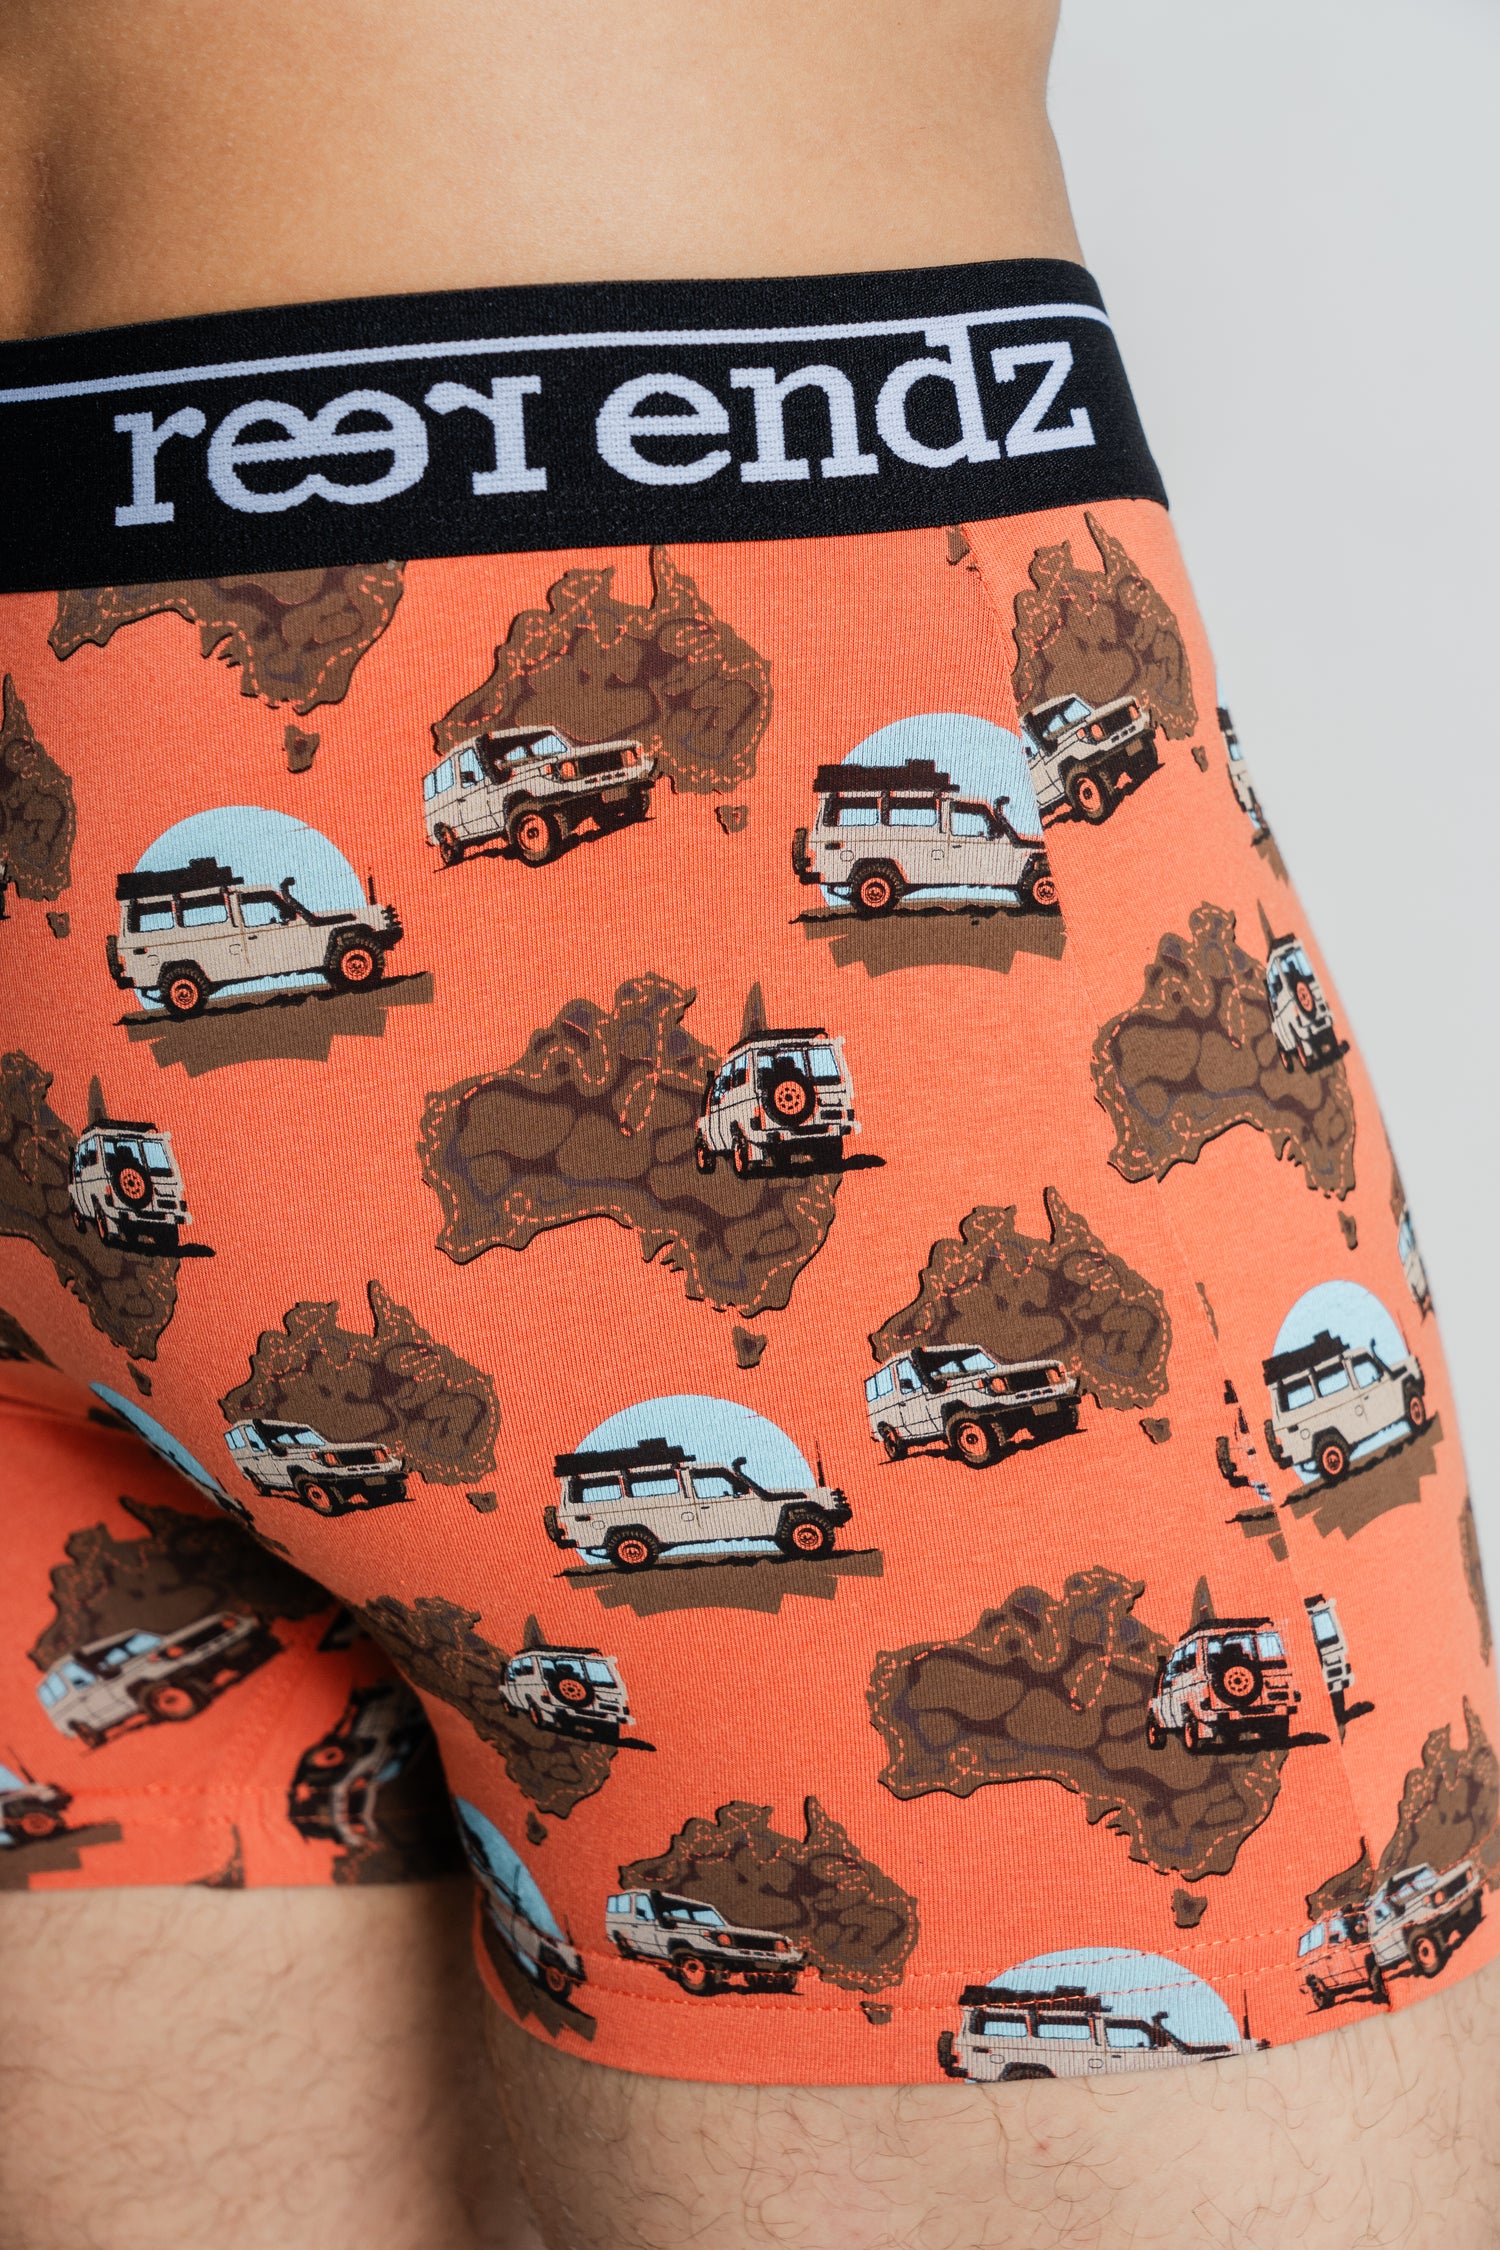 Our male model presents Reer Endz men's trunks in the fashionable Cruisin' Print, emphasizing the superior comfort and eco-consciousness of Organic Cotton